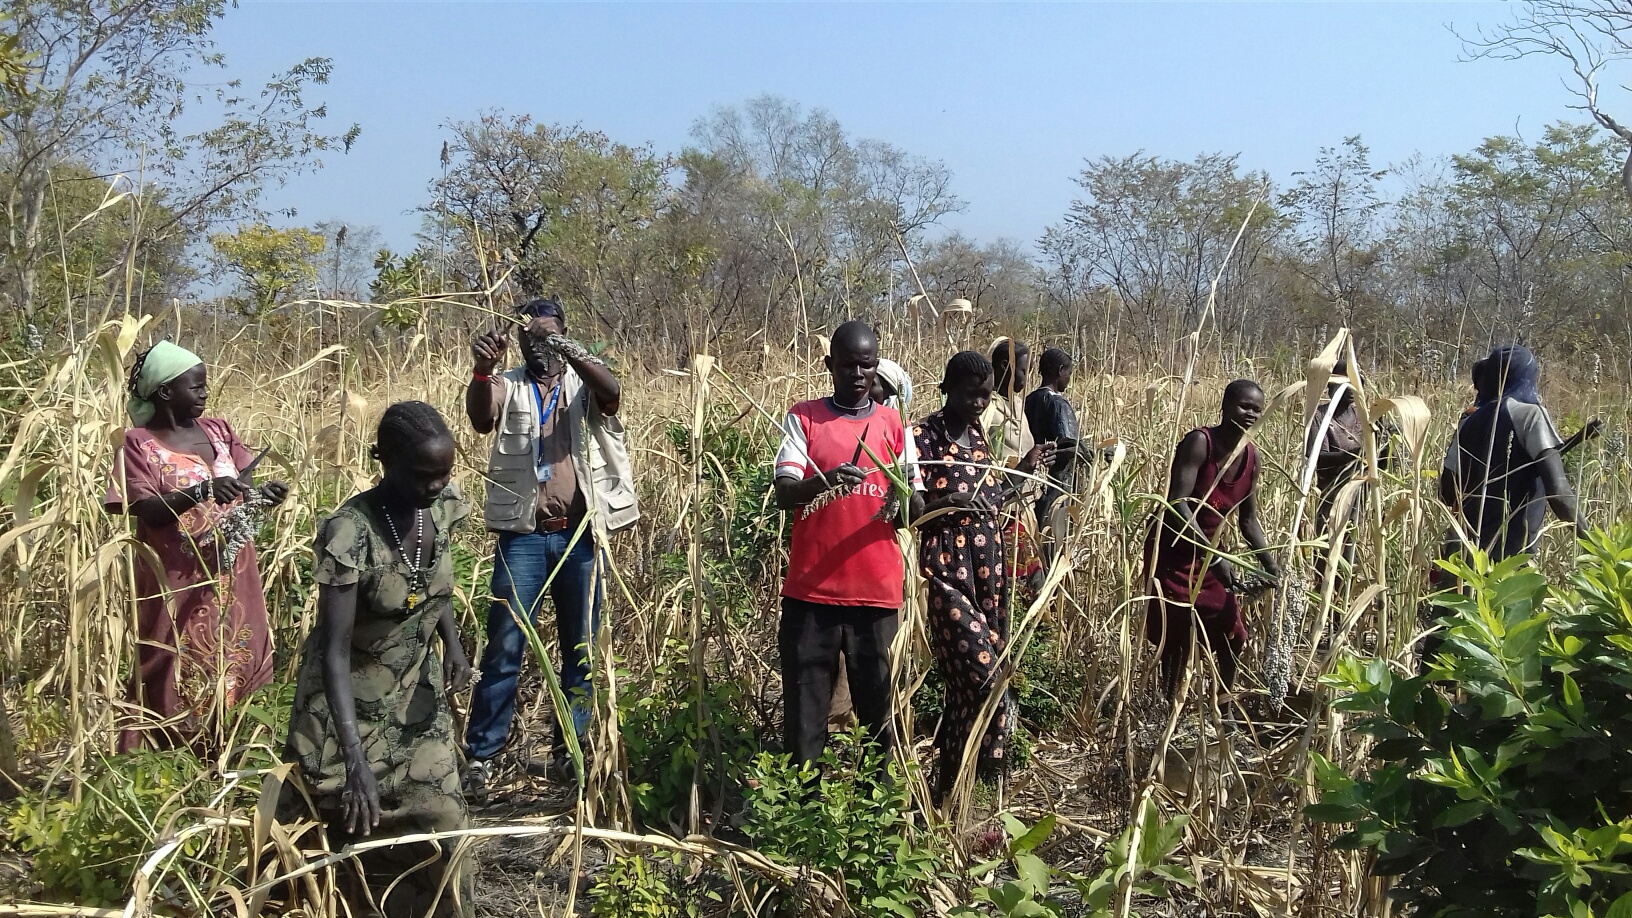 N Xxx Cm Video Hd - The unspoken resilience of rural women in South Sudan - ACTED